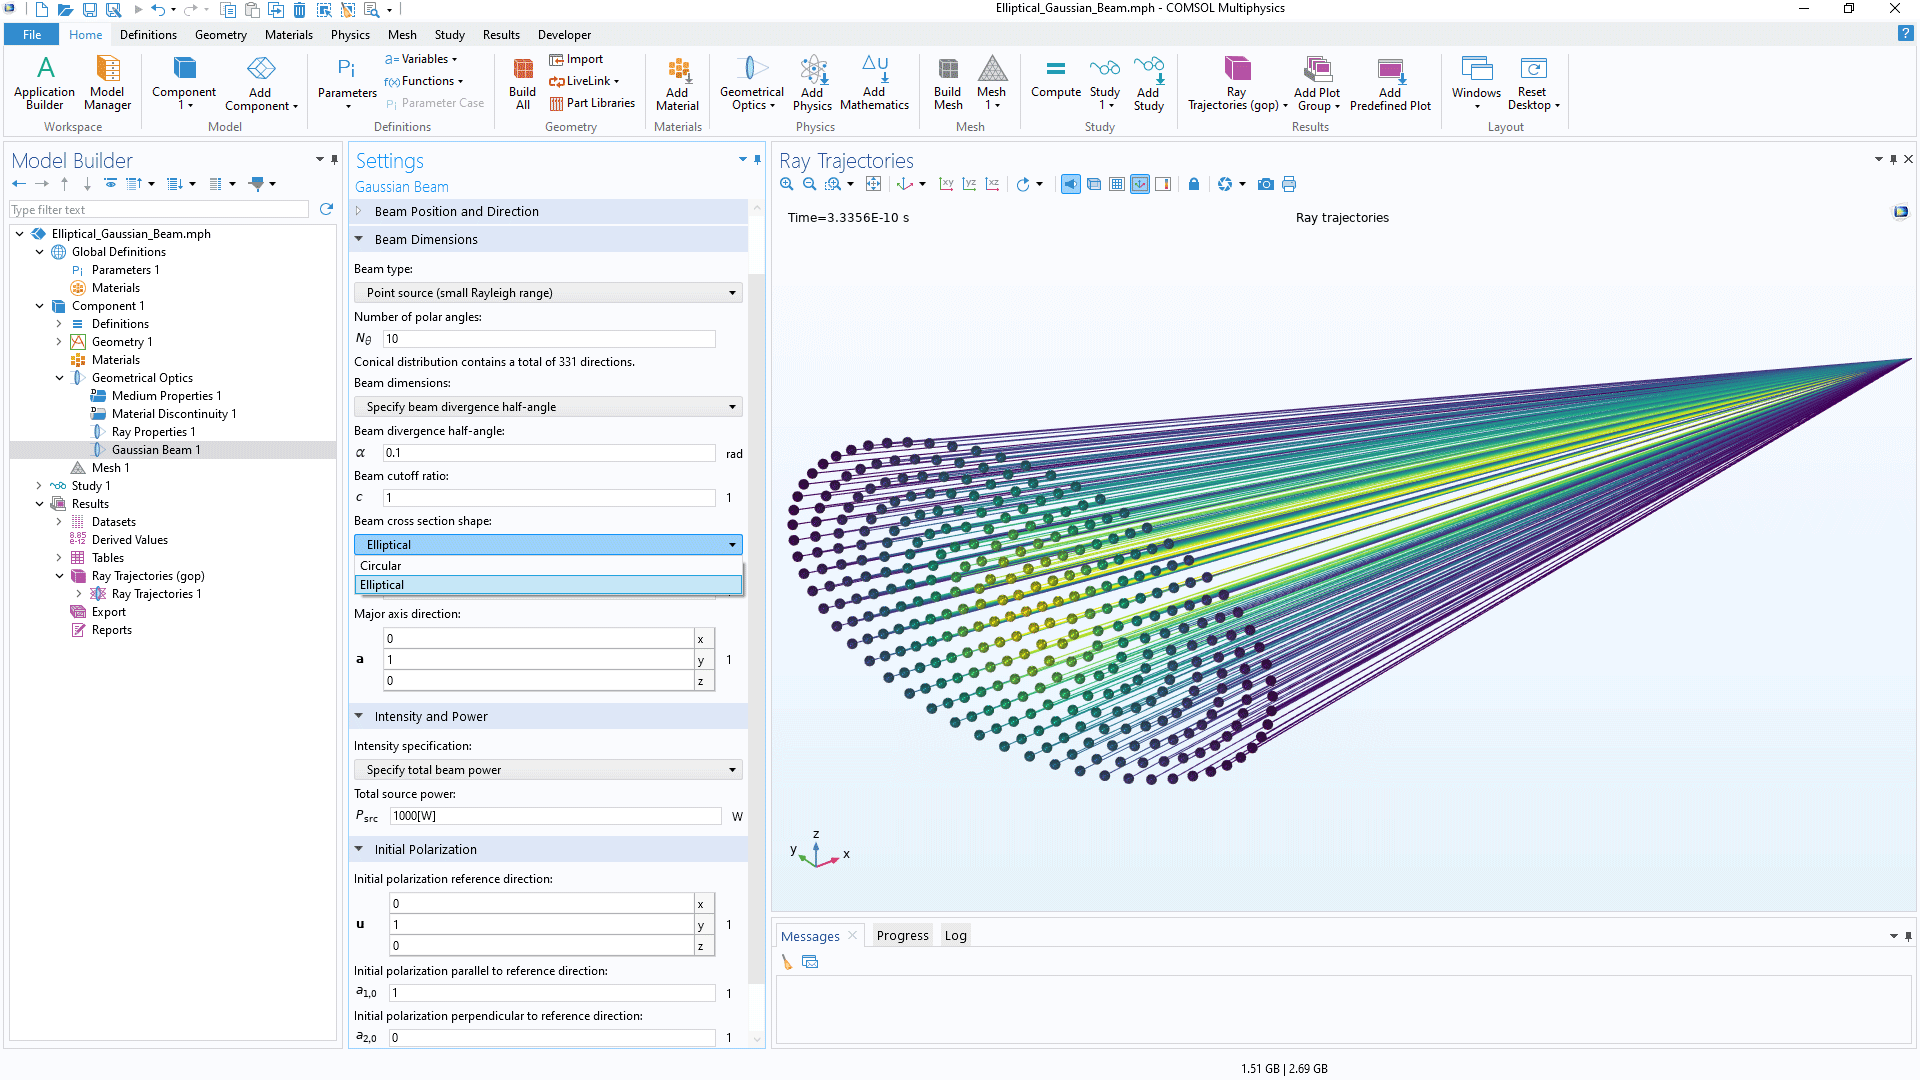 The COMSOL Multiphysics UI showing the Model Builder with the Gaussian Beam node highlighted, the corresponding Settings window, and a beam model in the Graphics window.